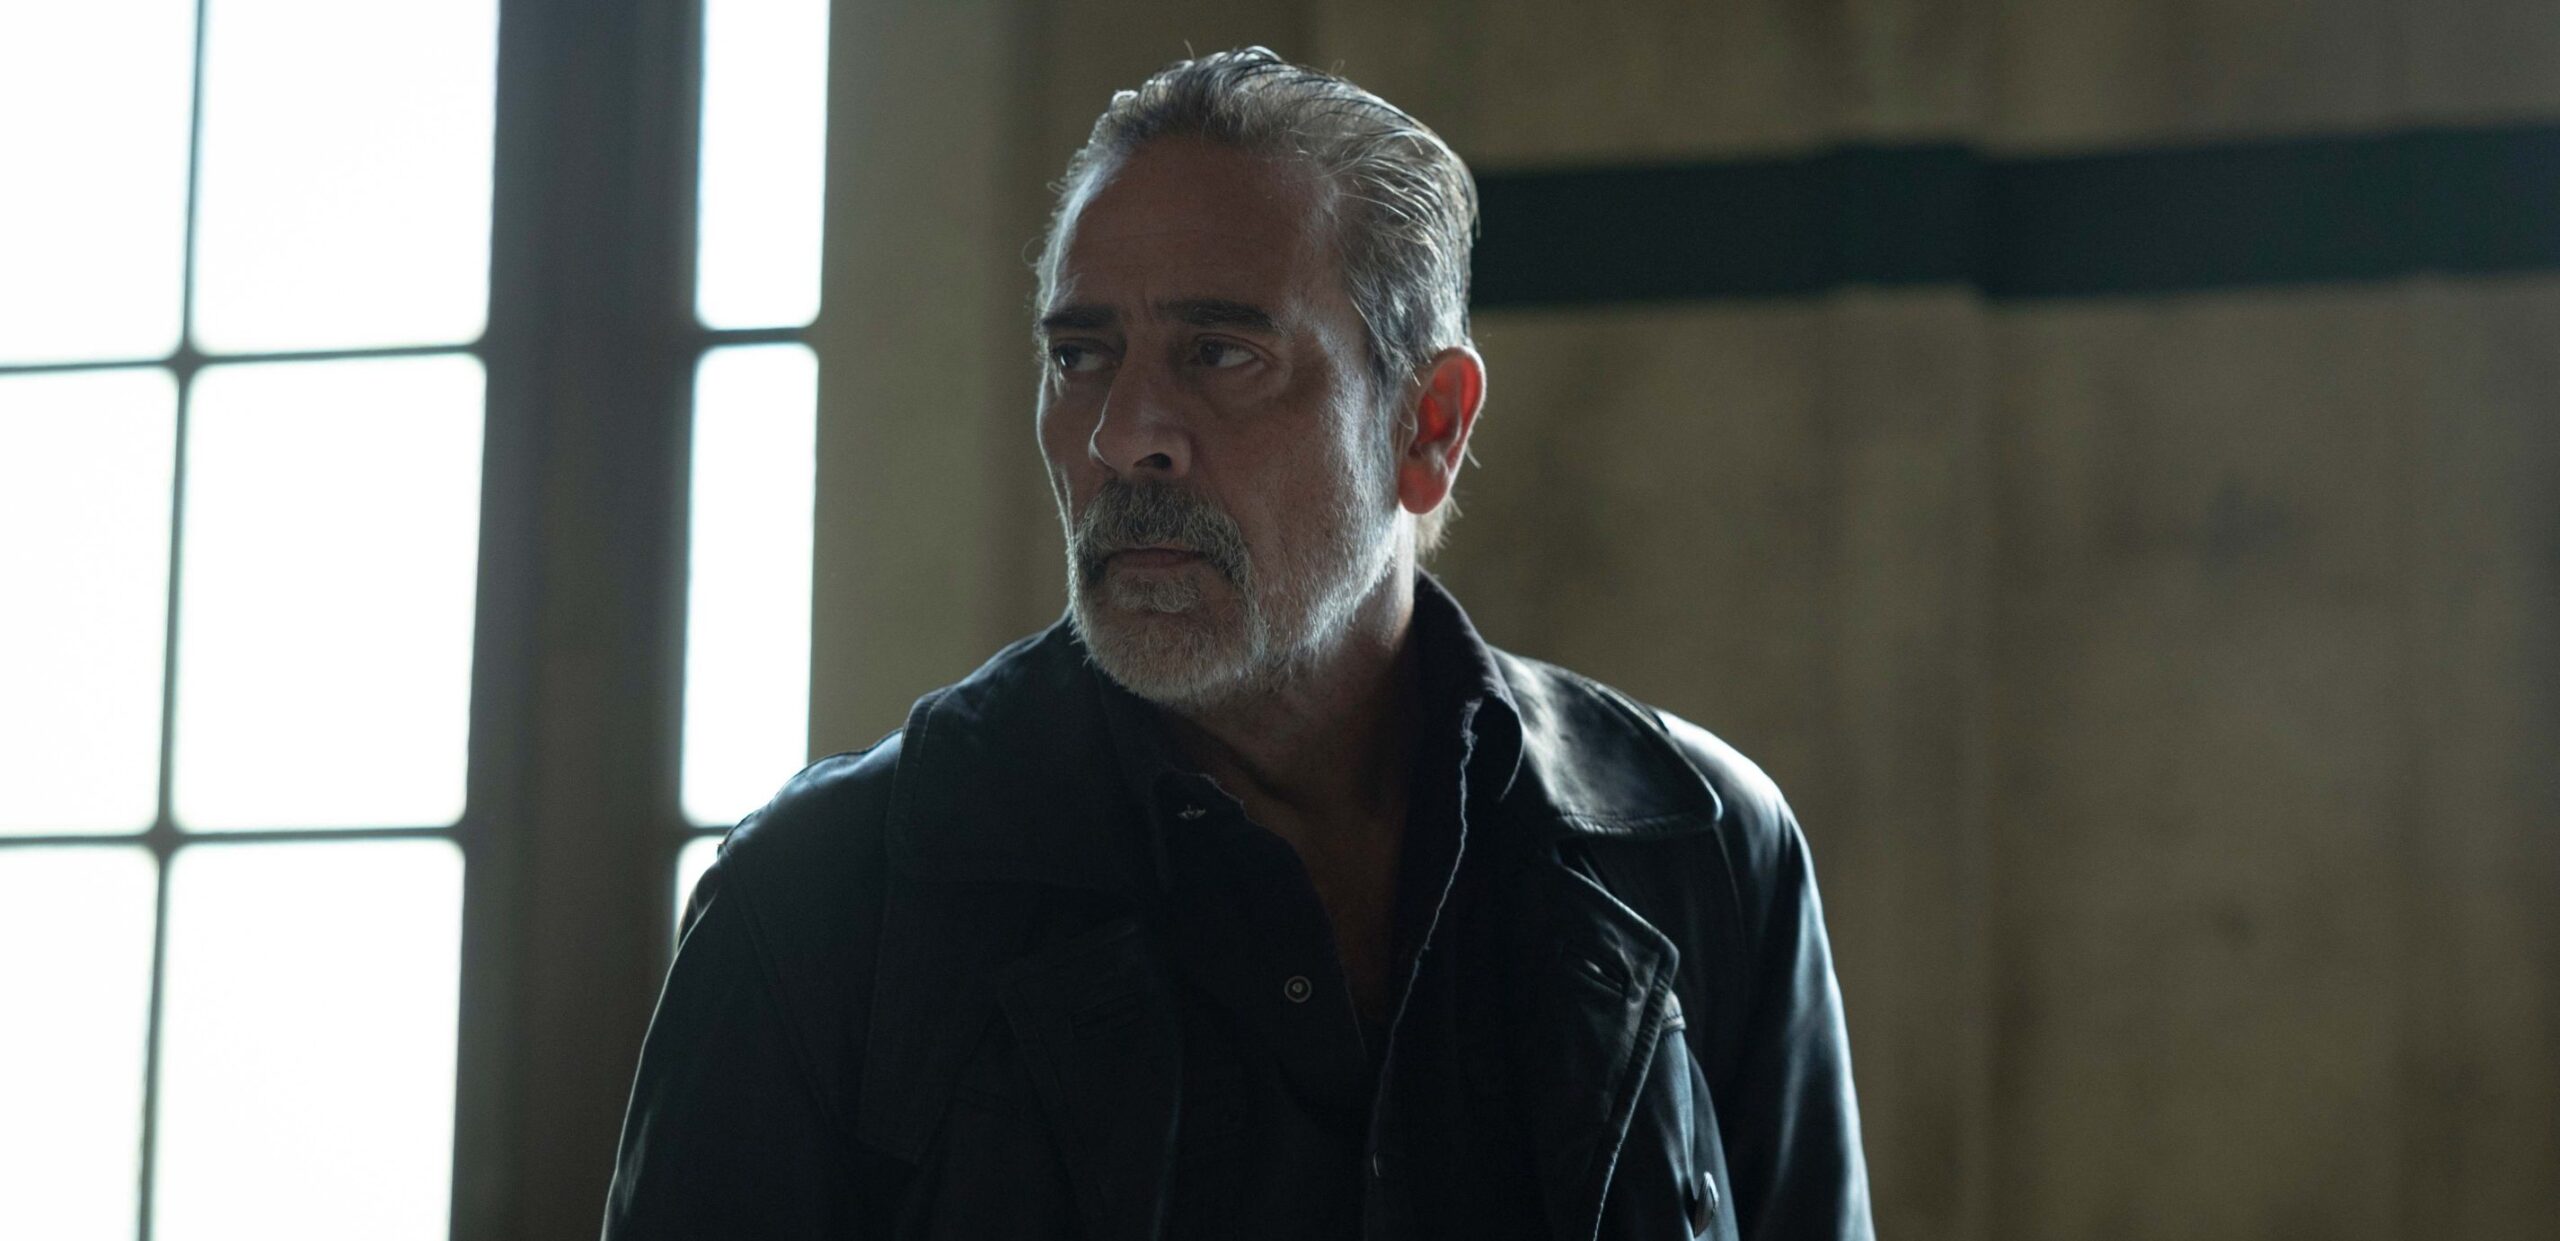 fear the walking dead,dead city episodes,walking dead dead city season 2,the walking dead dead city season 2 release date,what part of hershel was in the box,walking dead dead city season 1 finale: recap and ending explained